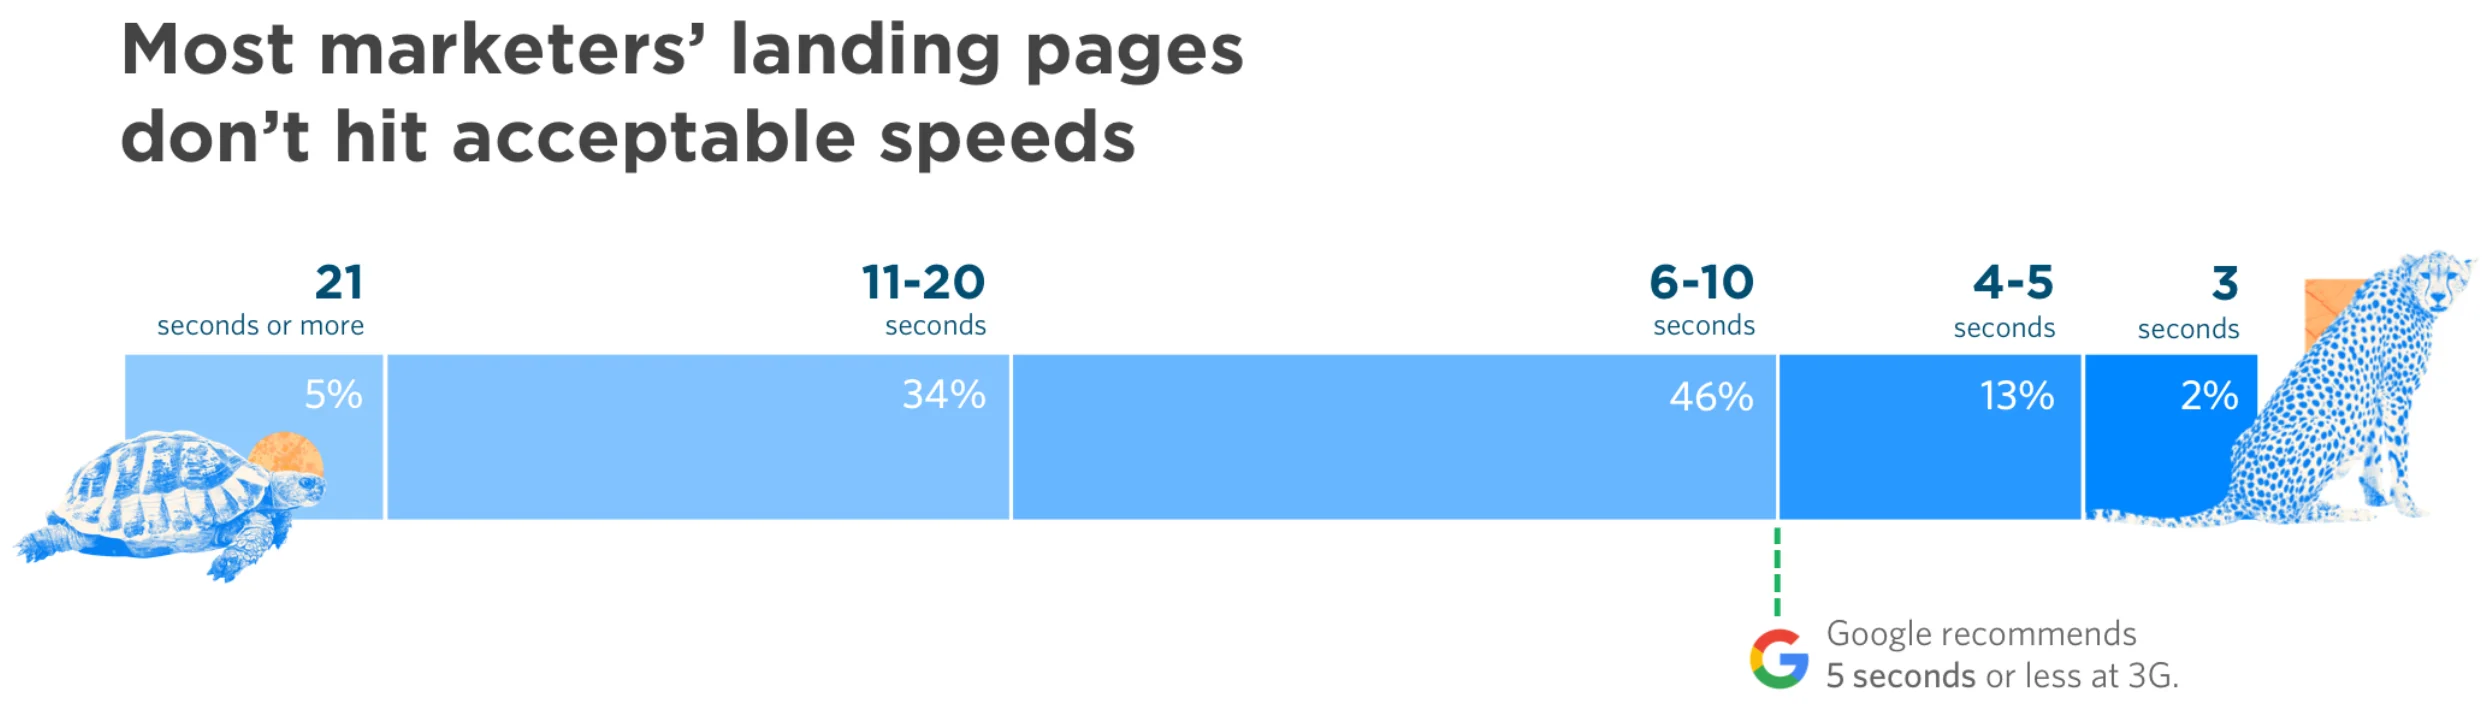 Website Operating at Acceptable Page Speed